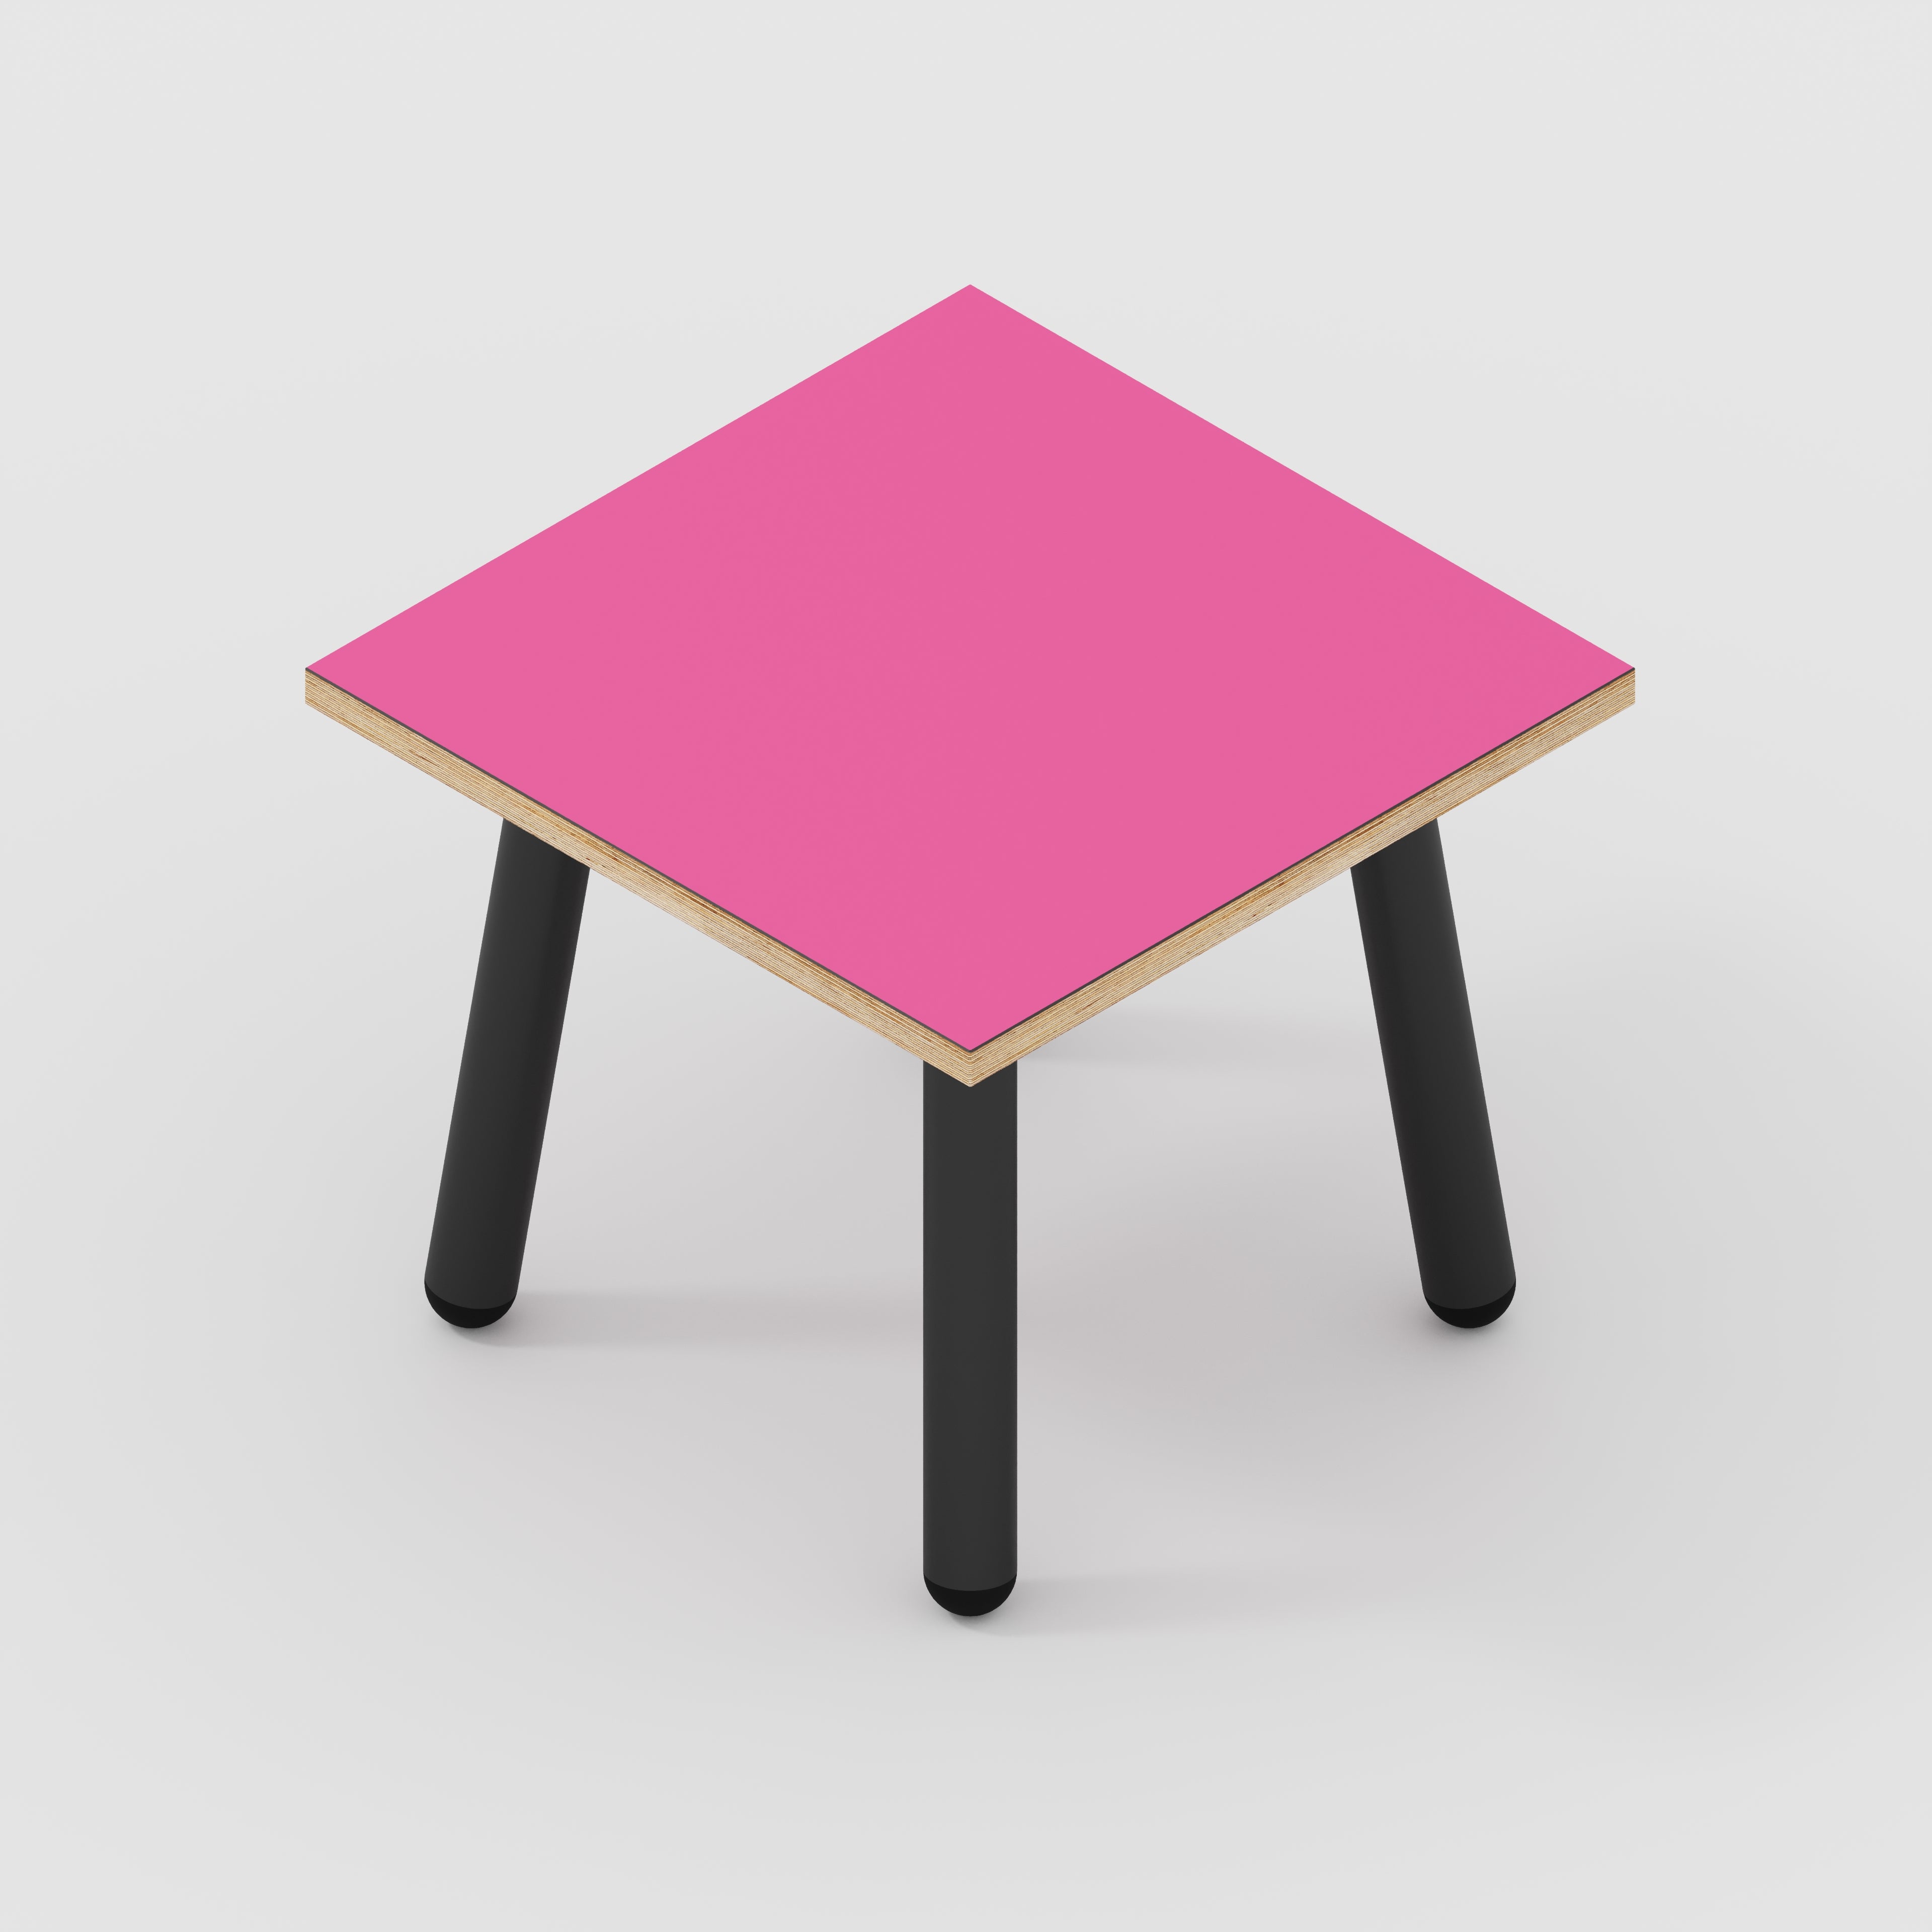 Side Table with Round Single Pin Legs - Formica Juicy Pink - 500(w) x 500(d) x 425(h)